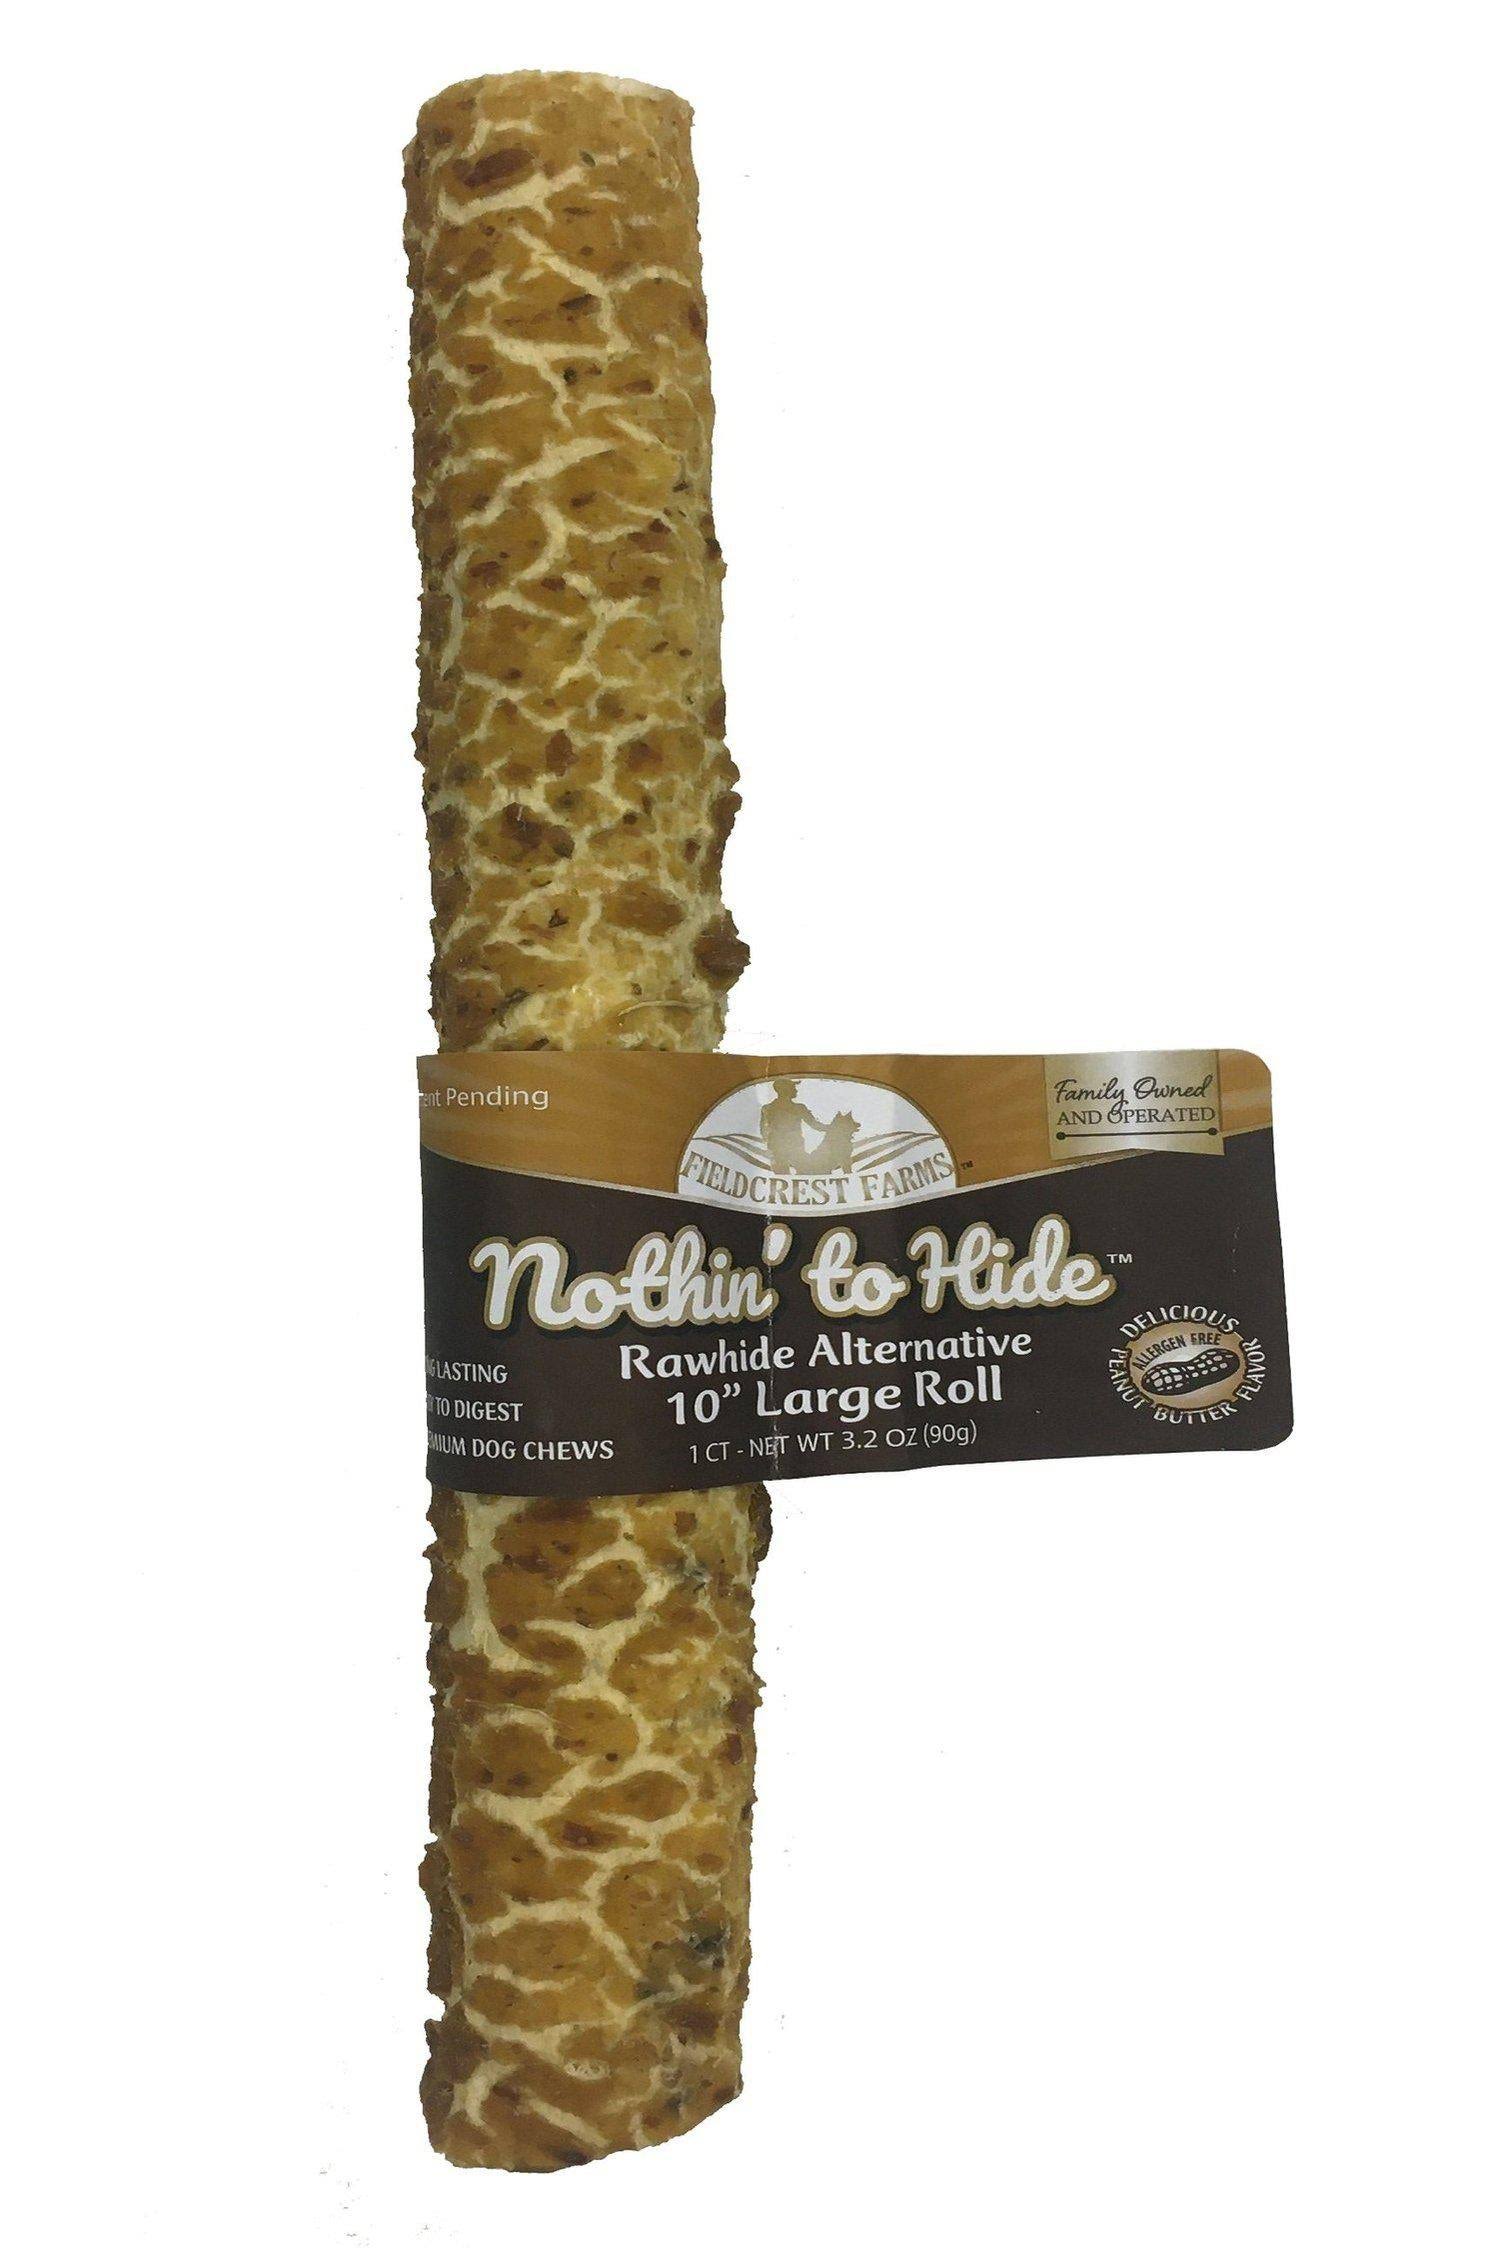 Nothin' To Hide Peanut Butter Roll - 10" Singles